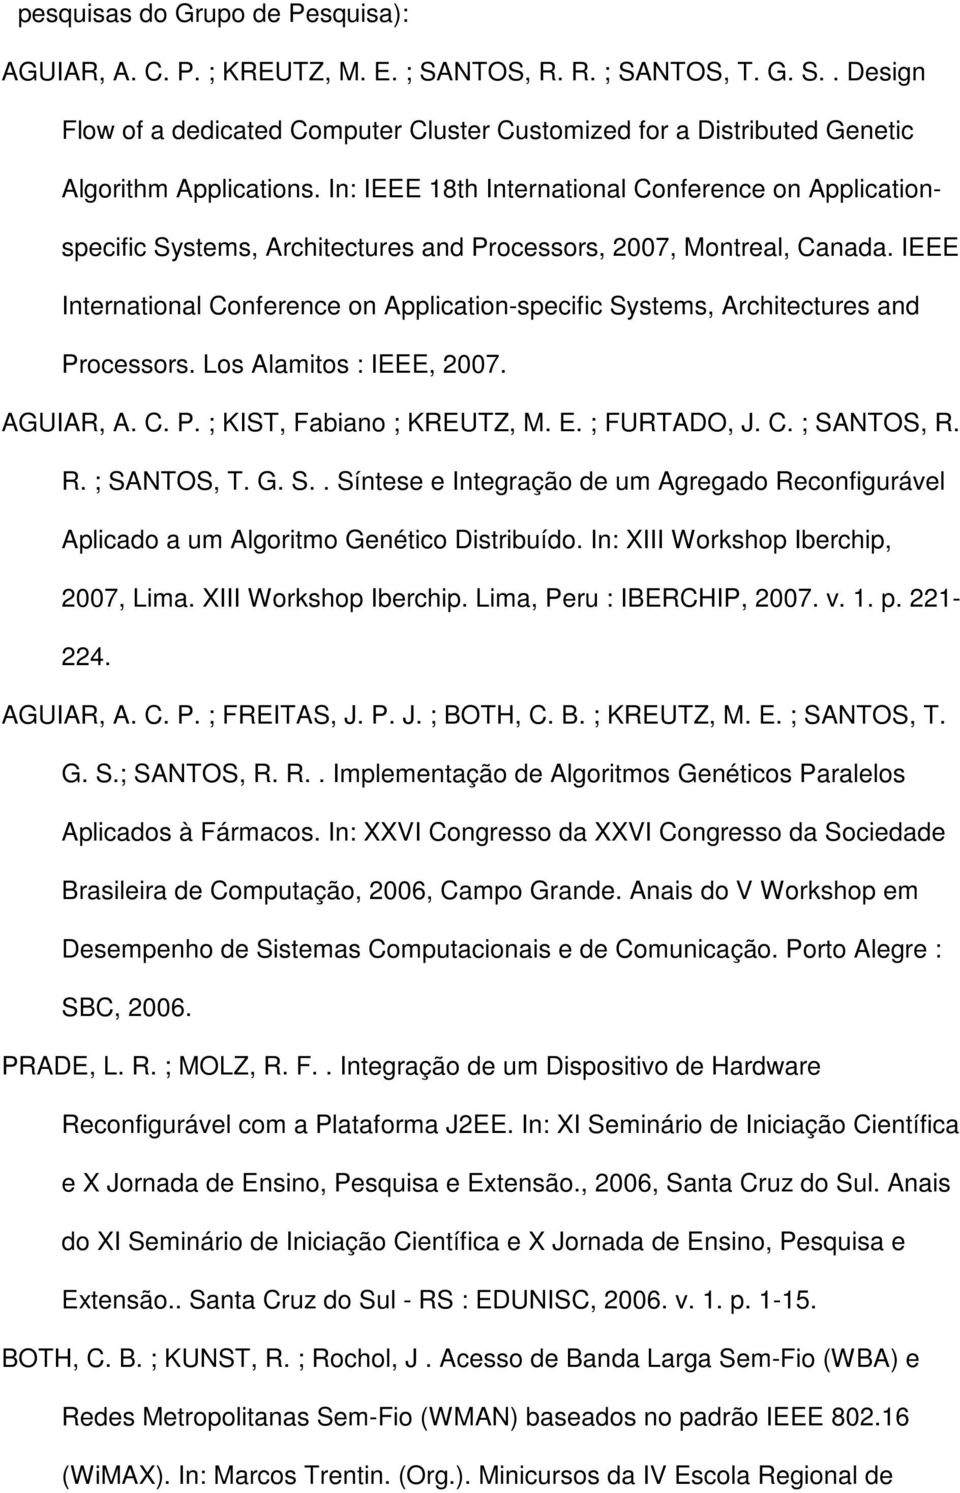 IEEE International Conference on Application-specific Systems, Architectures and Processors. Los Alamitos : IEEE, 2007. AGUIAR, A. C. P. ; KIST, Fabiano ; KREUTZ, M. E. ; FURTADO, J. C. ; SANTOS, R.